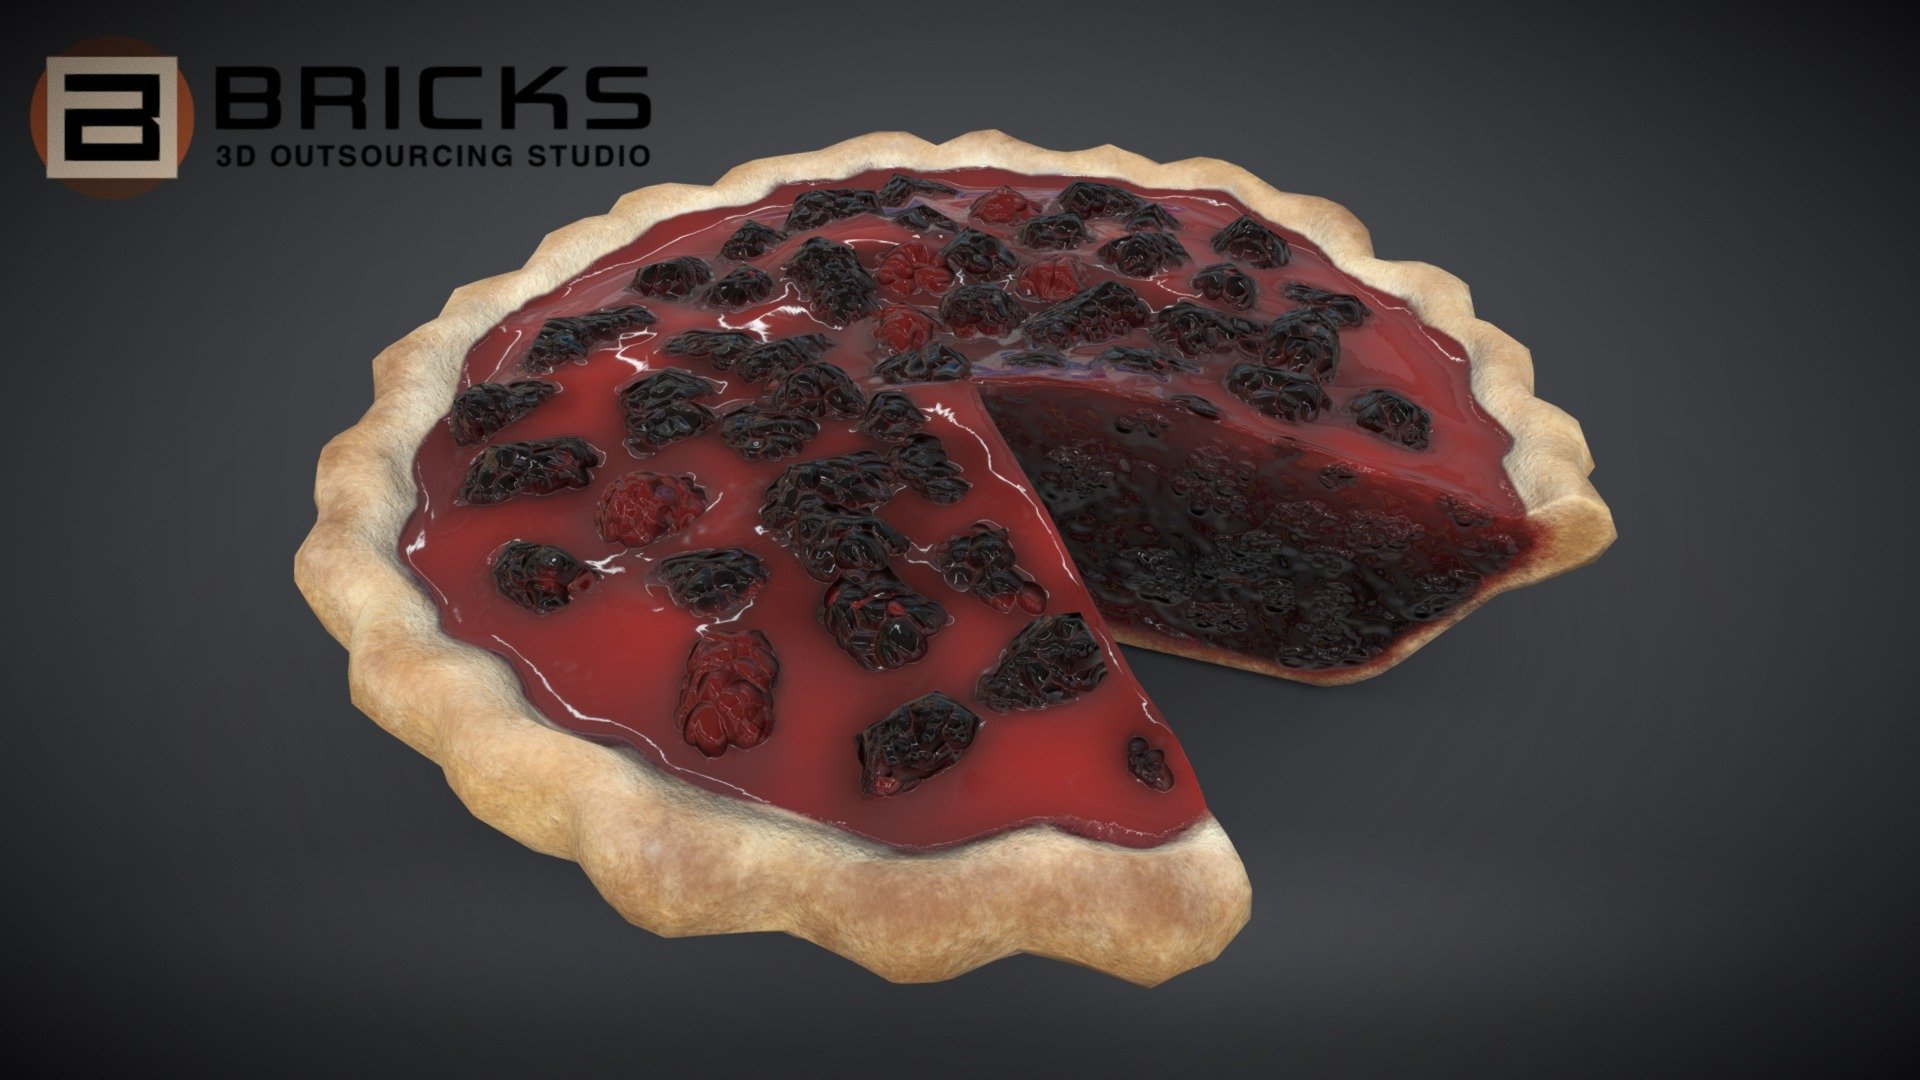 PBR Food Asset:
BlackGrassberryPieChart
Polycount: 1998
Vertex count: 1001
Texture Size: 2048px x 2048px
Normal: OpenGL

If you need any adjust in file please contact us: team@bricks3dstudio.com

Hire us: tringuyen@bricks3dstudio.com
Here is us: https://www.bricks3dstudio.com/
        https://www.artstation.com/bricksstudio
        https://www.facebook.com/Bricks3dstudio/
        https://www.linkedin.com/in/bricks-studio-b10462252/ - BlackGrassberryPieChart - Buy Royalty Free 3D model by Bricks Studio (@bricks3dstudio) 3d model